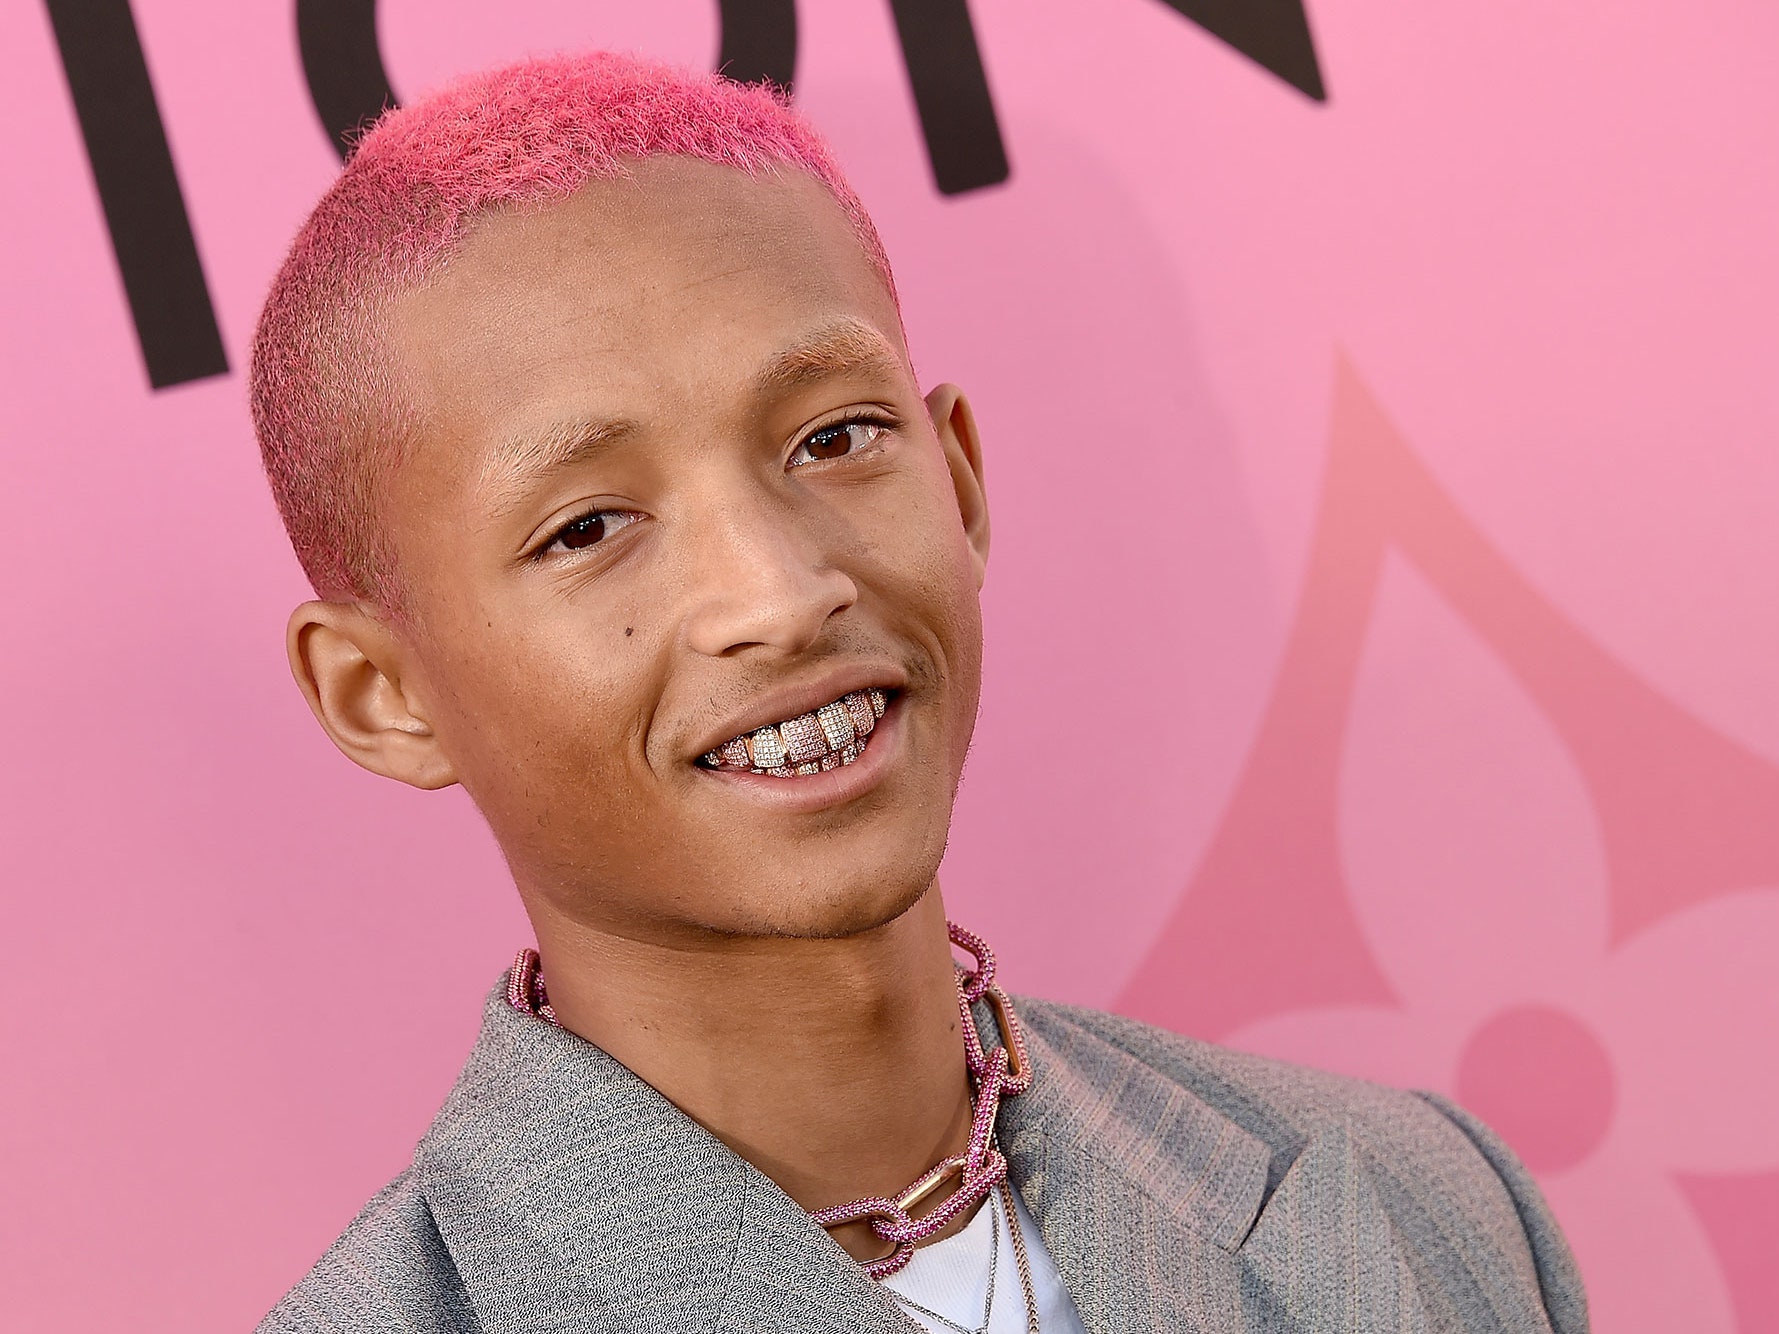 Who is Jaden Smith? 